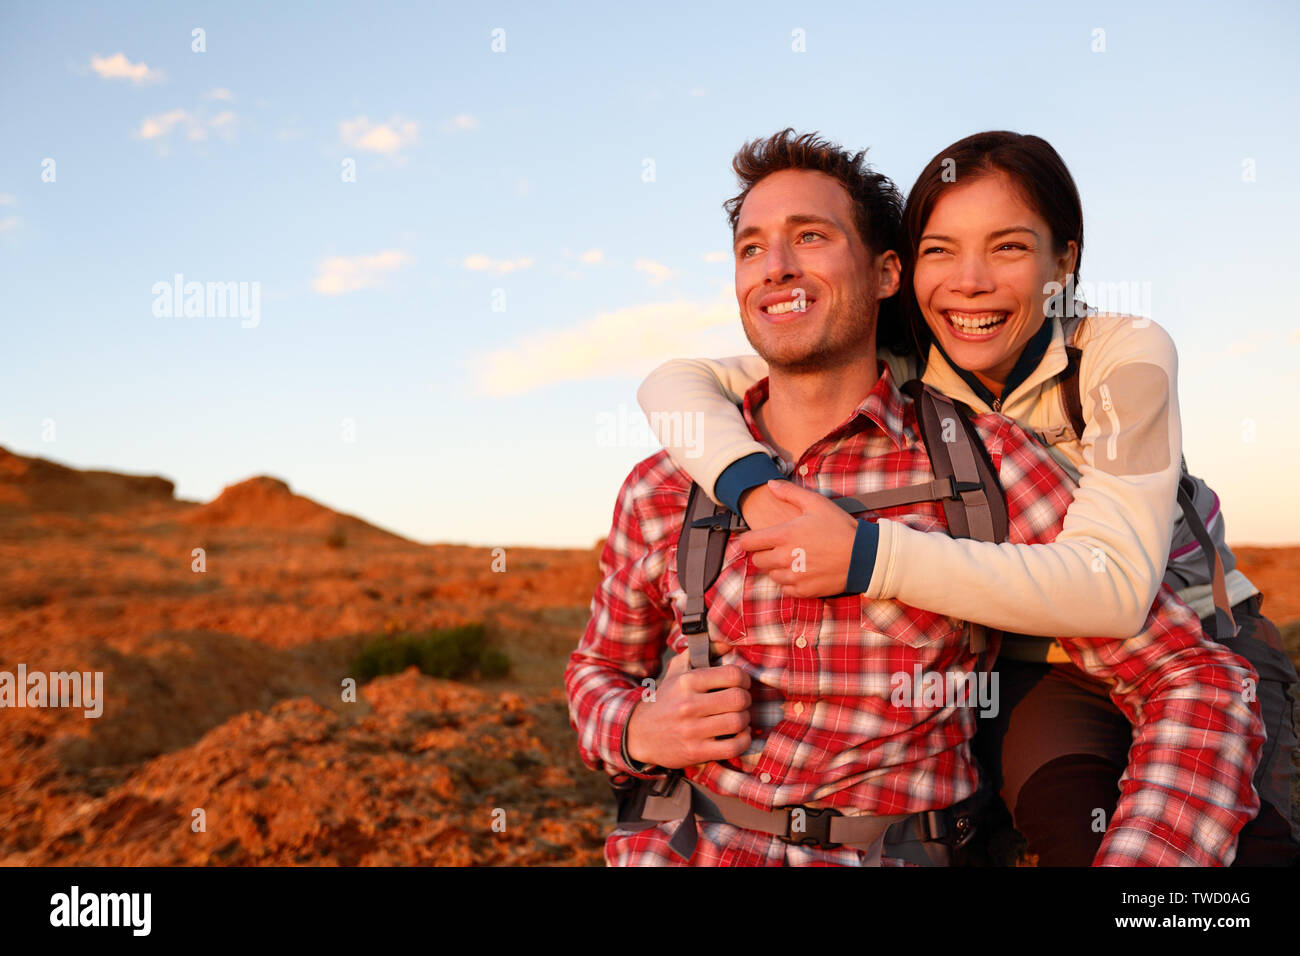 Happy couple active lifestyle hiking enjoying outdoors activity. Smiling laughing young lovers embracing looking at sunset during hike. Cheerful interracial couple, Asian woman, Caucasian man. Stock Photo